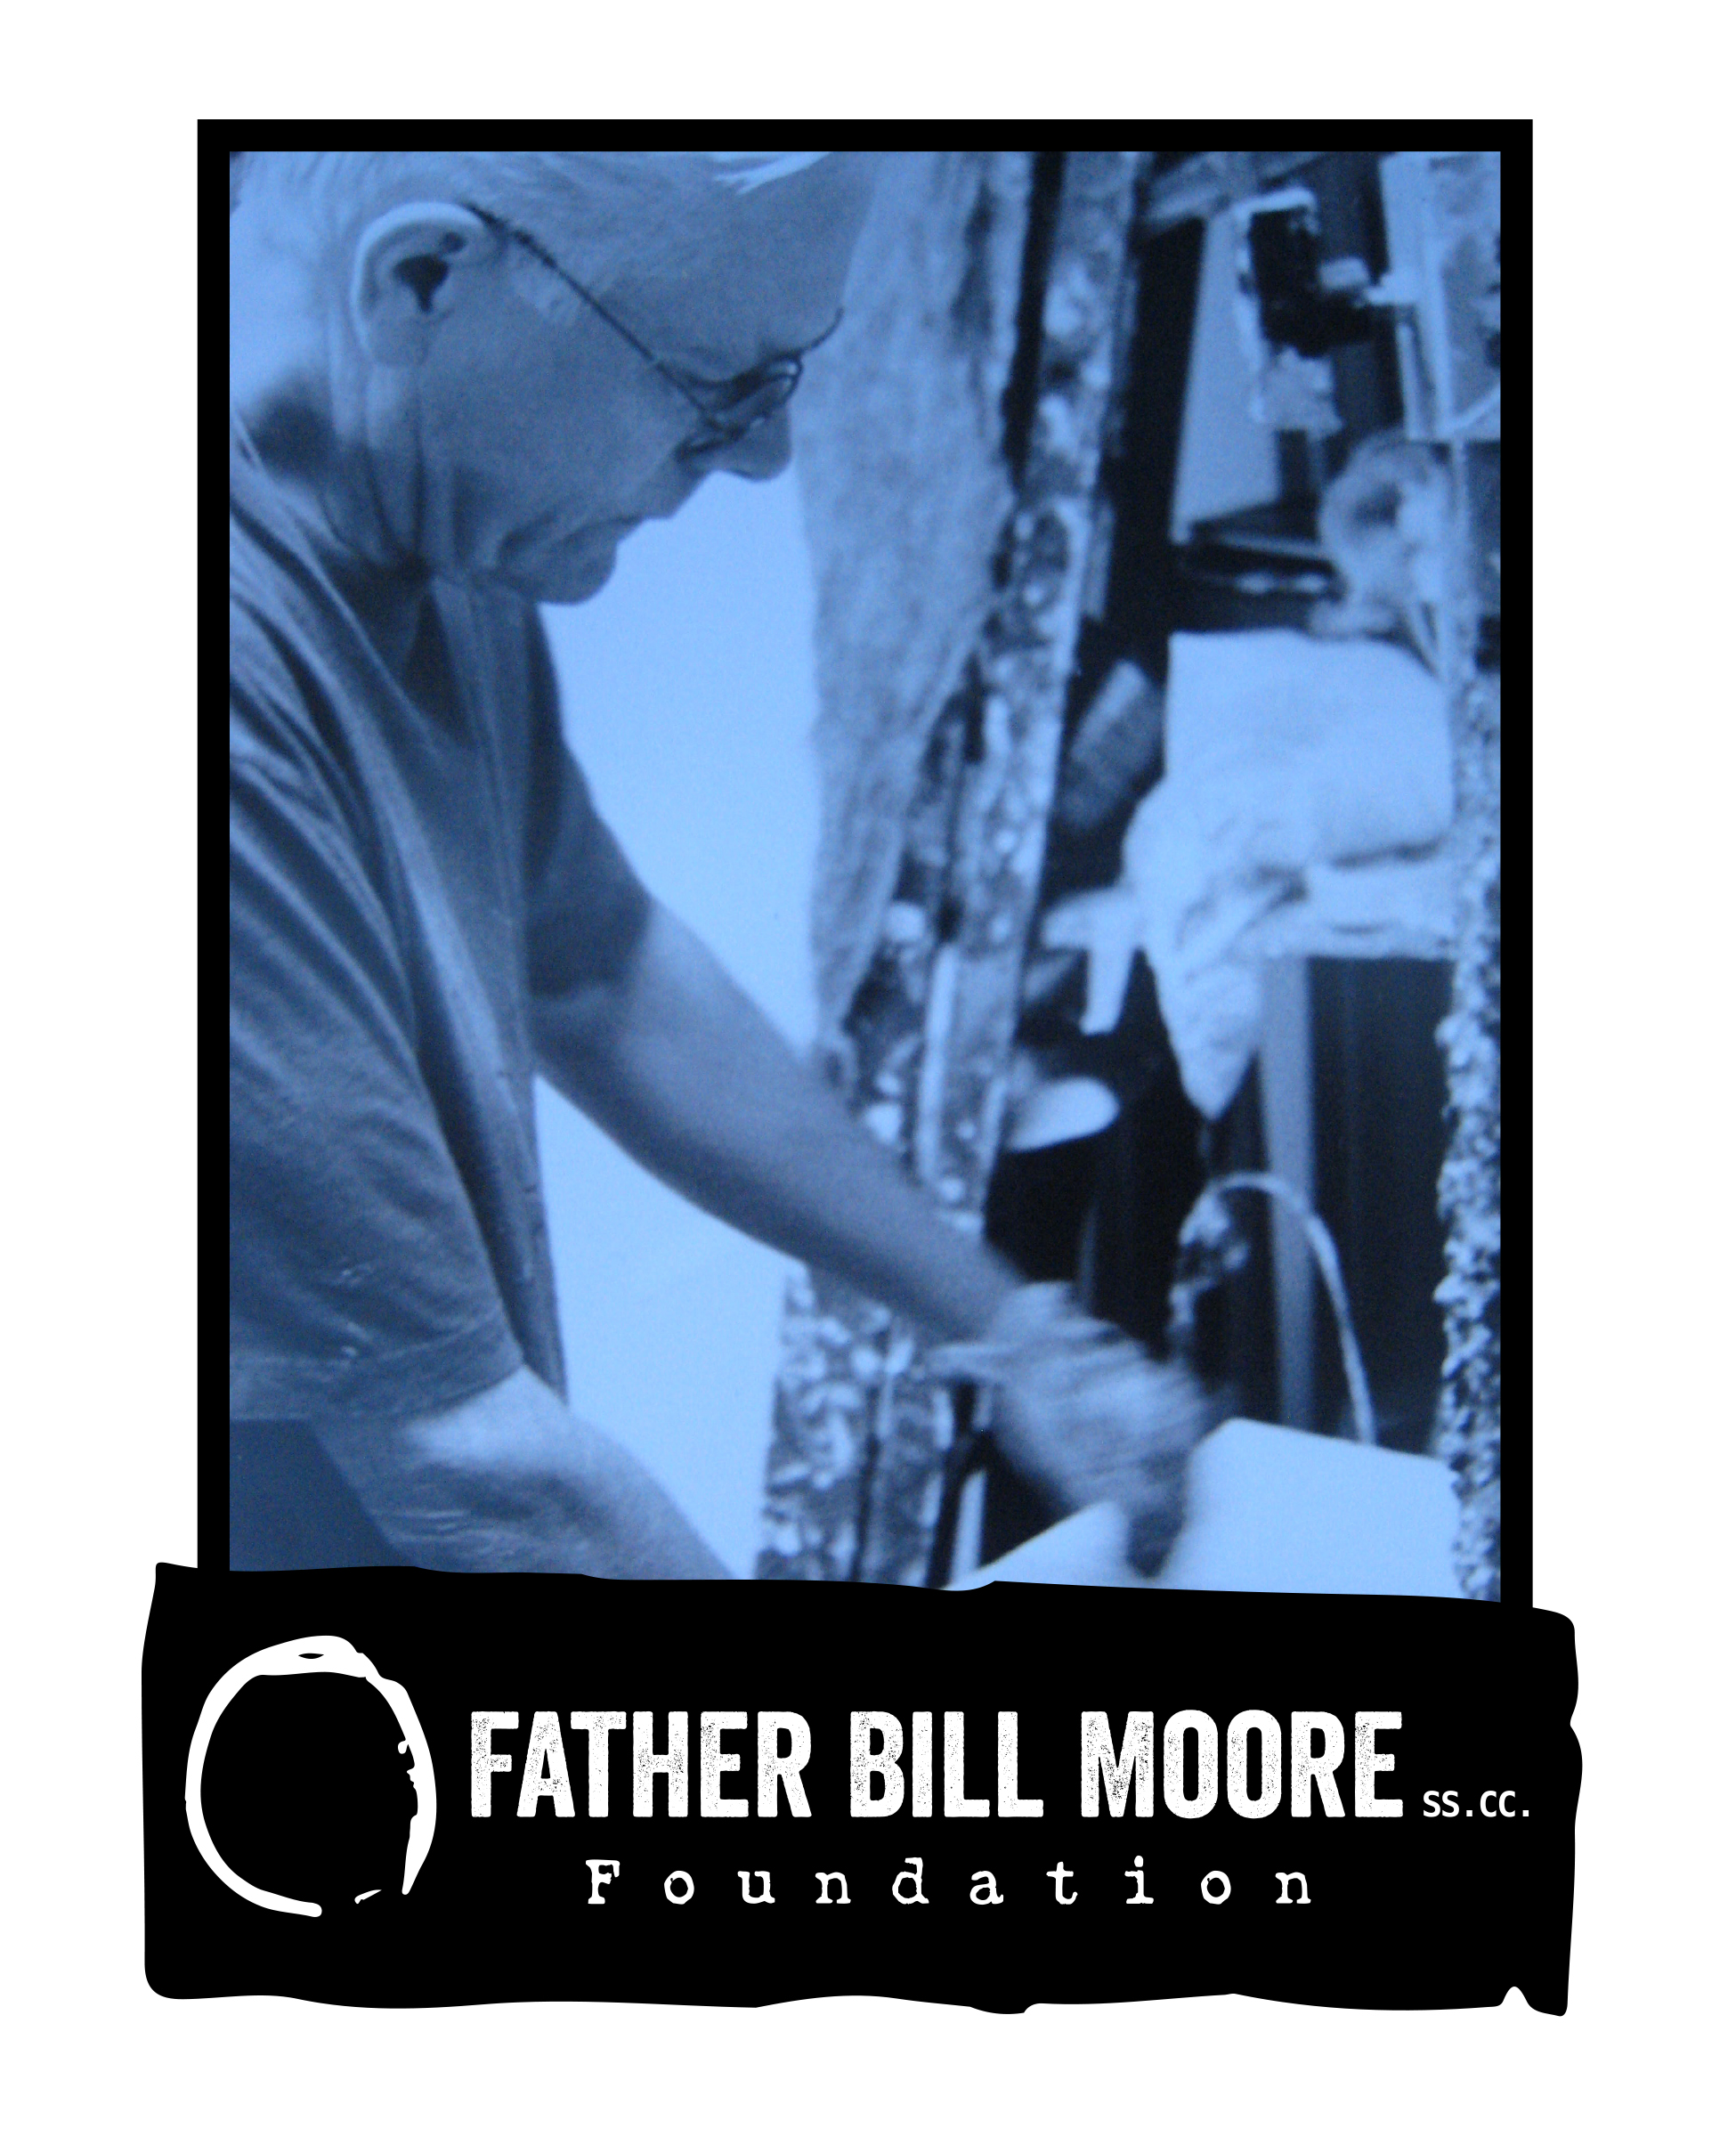 The Father Bill Moore Foundation For the Arts